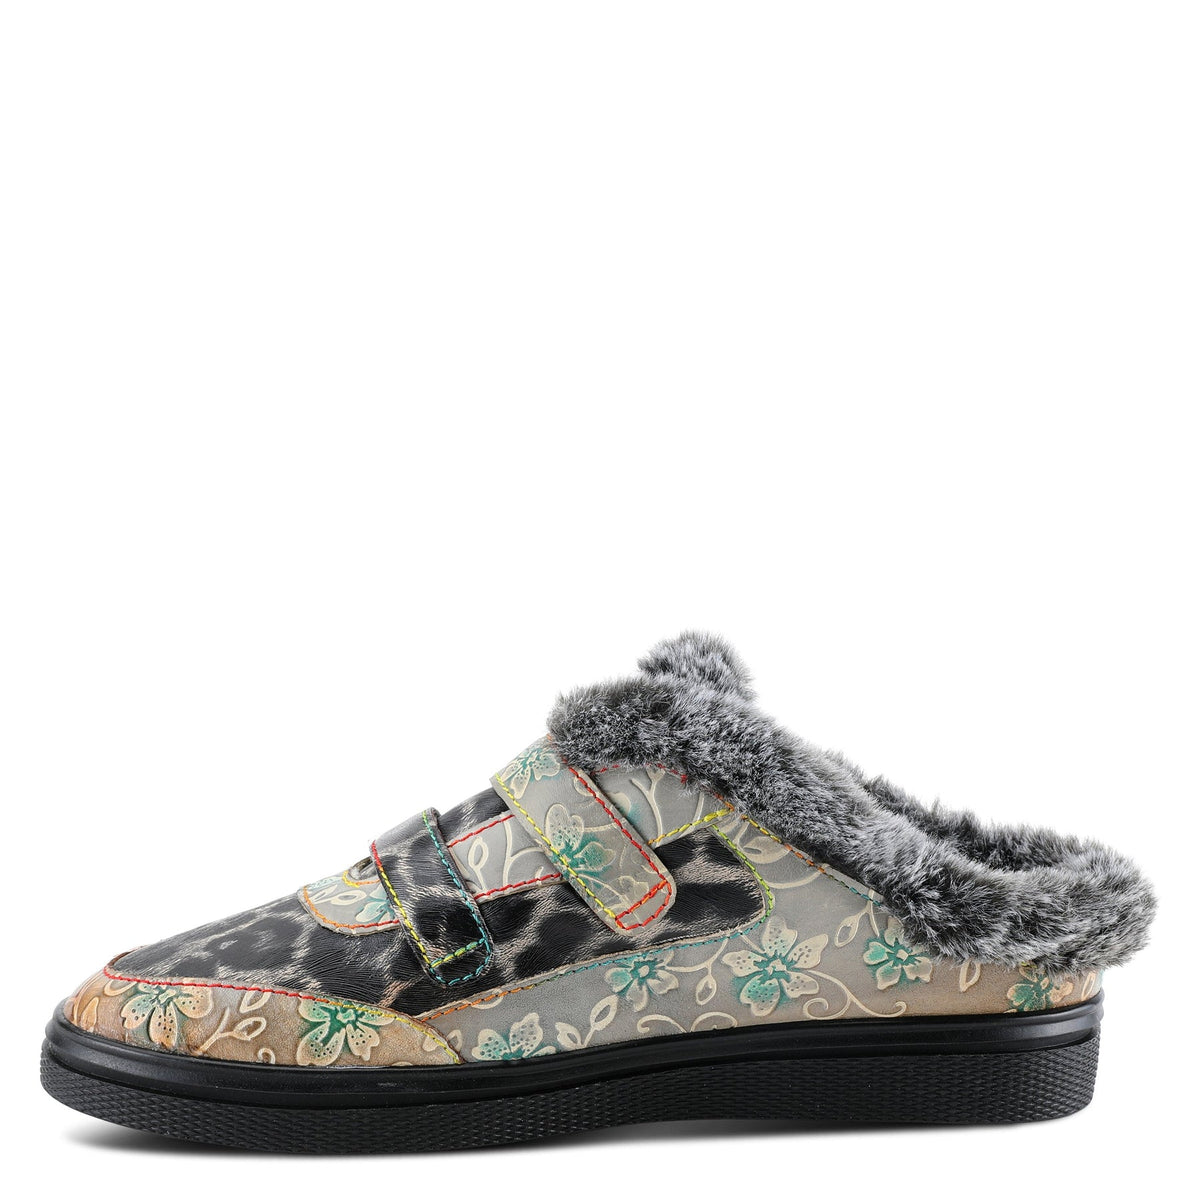 Slip-on shoe featuring an animal print trimmed in an embossed floral print and plush faux-fur with cozy lining on a flexible, comfortable sole. Style is Lamya by L'Artiste Springstep Footwear.